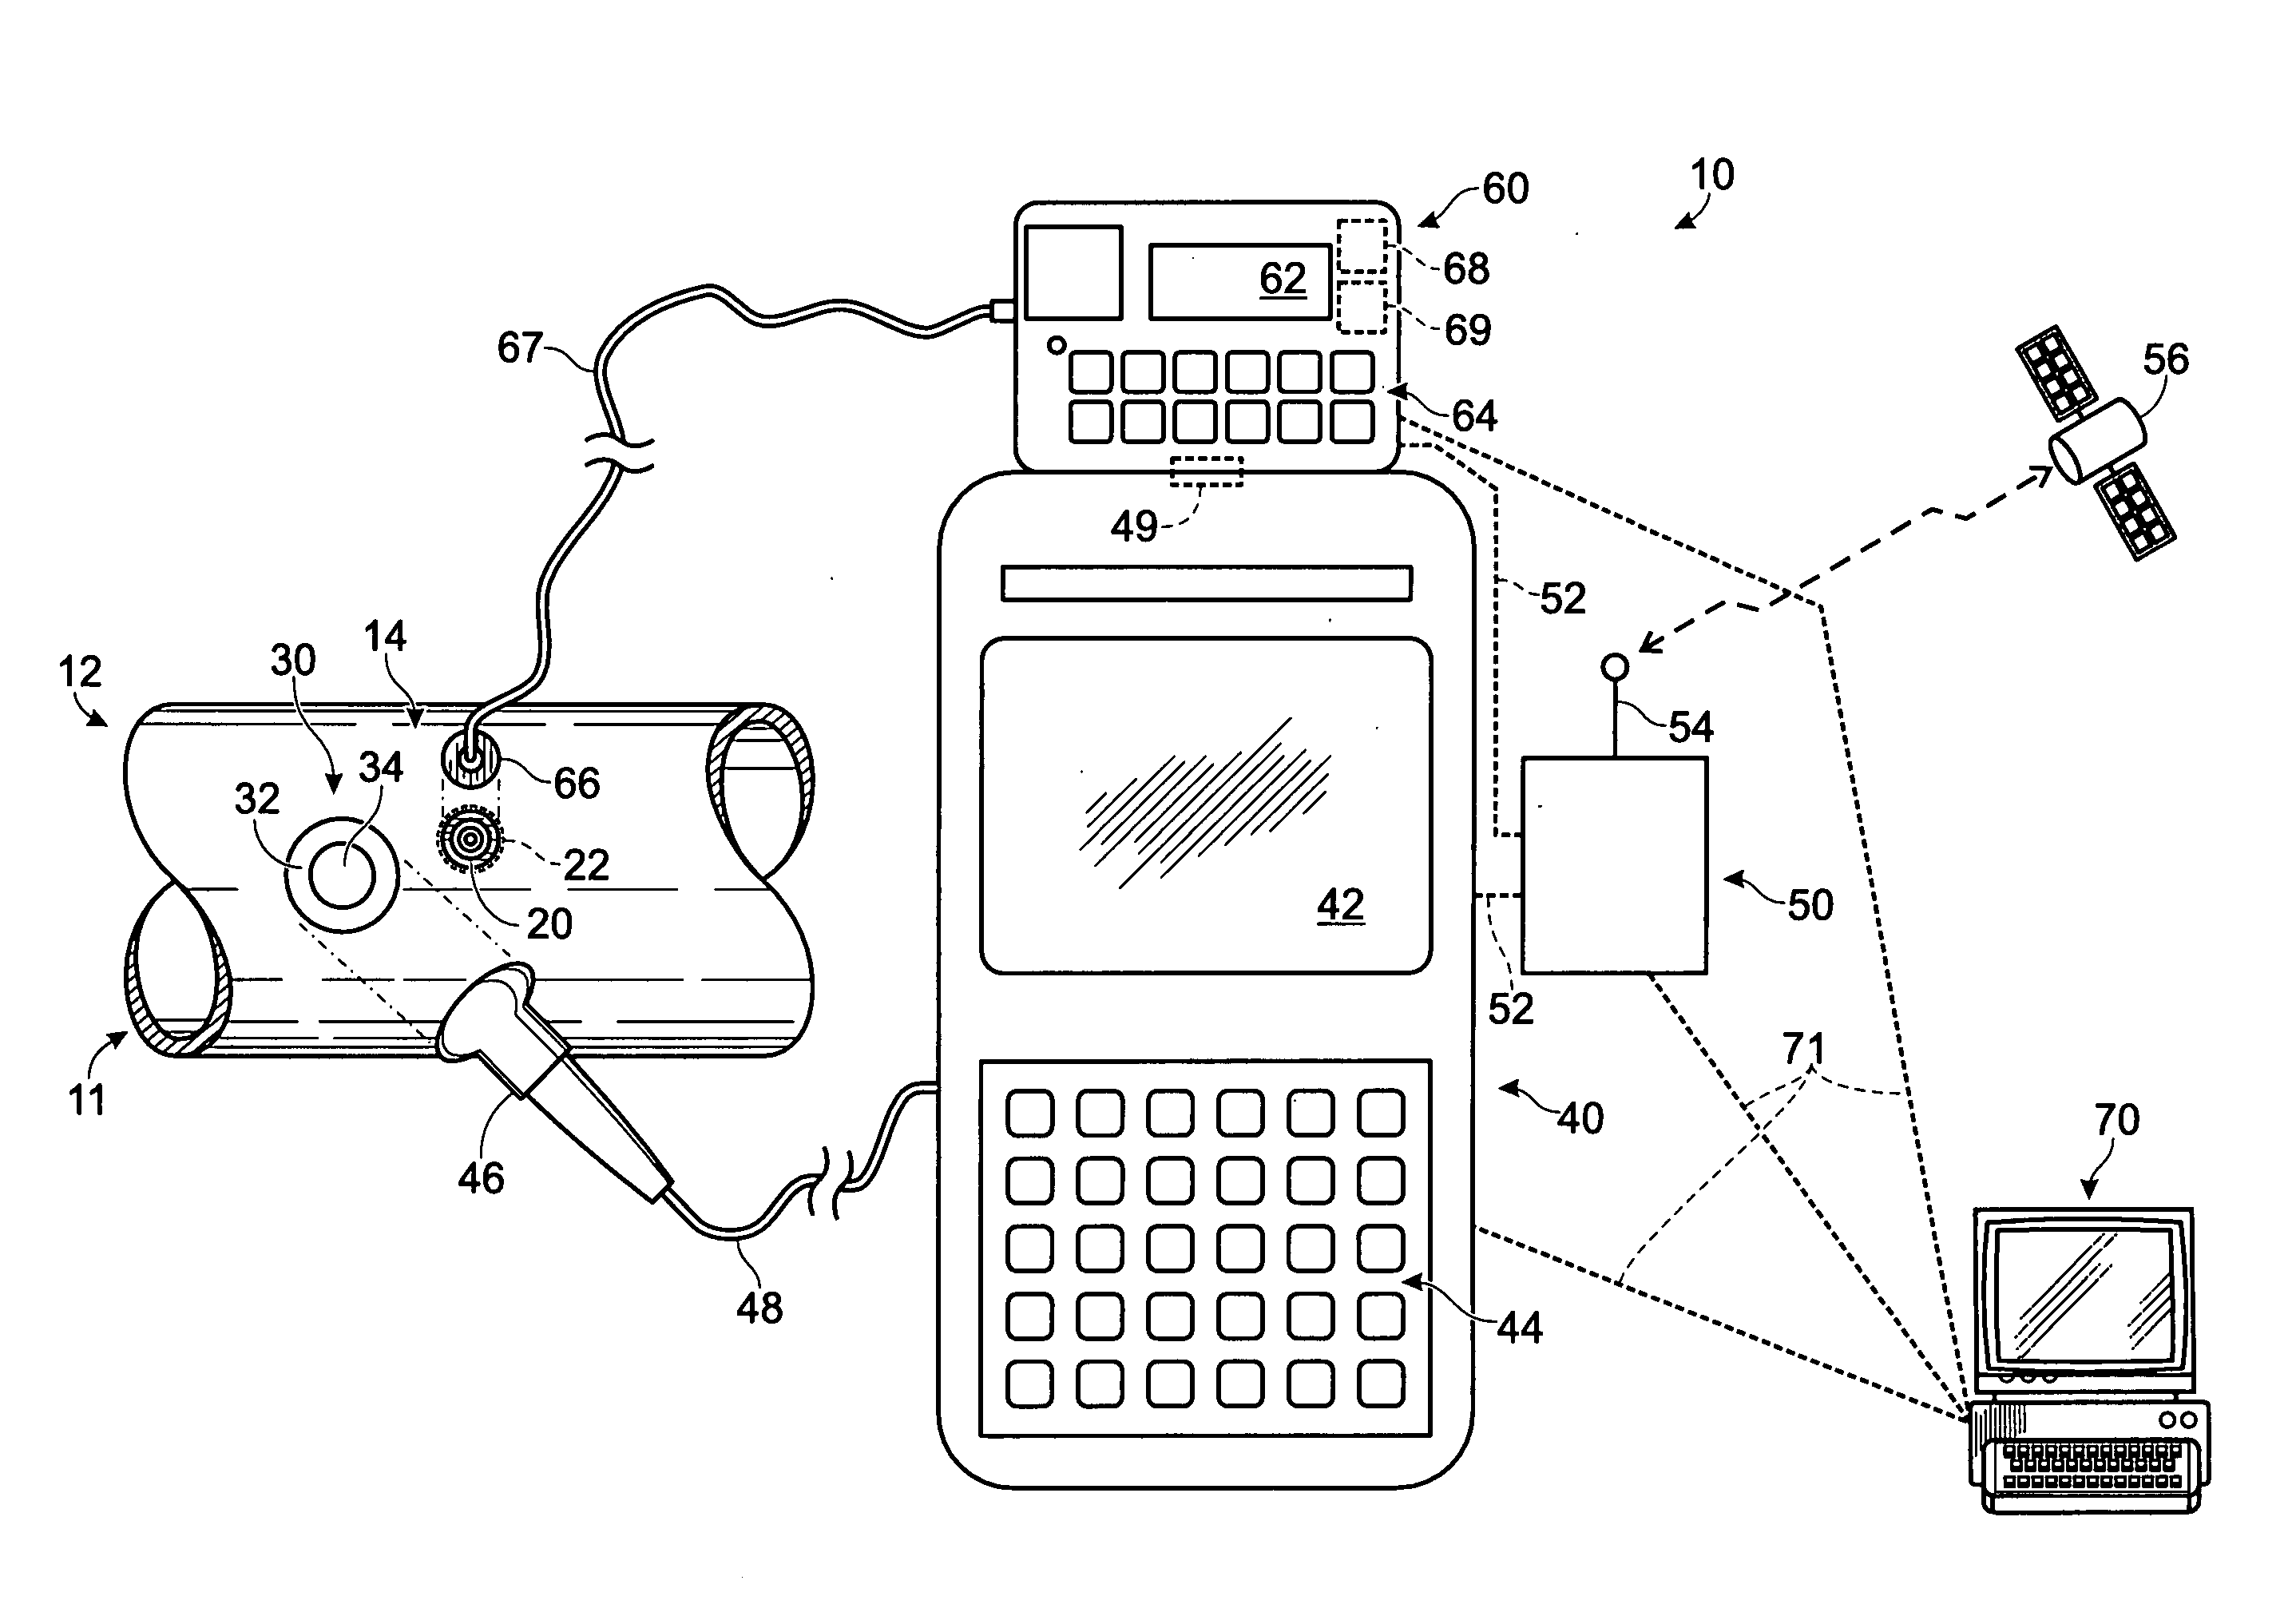 System and methods for testing, monitoring, and replacing equipment